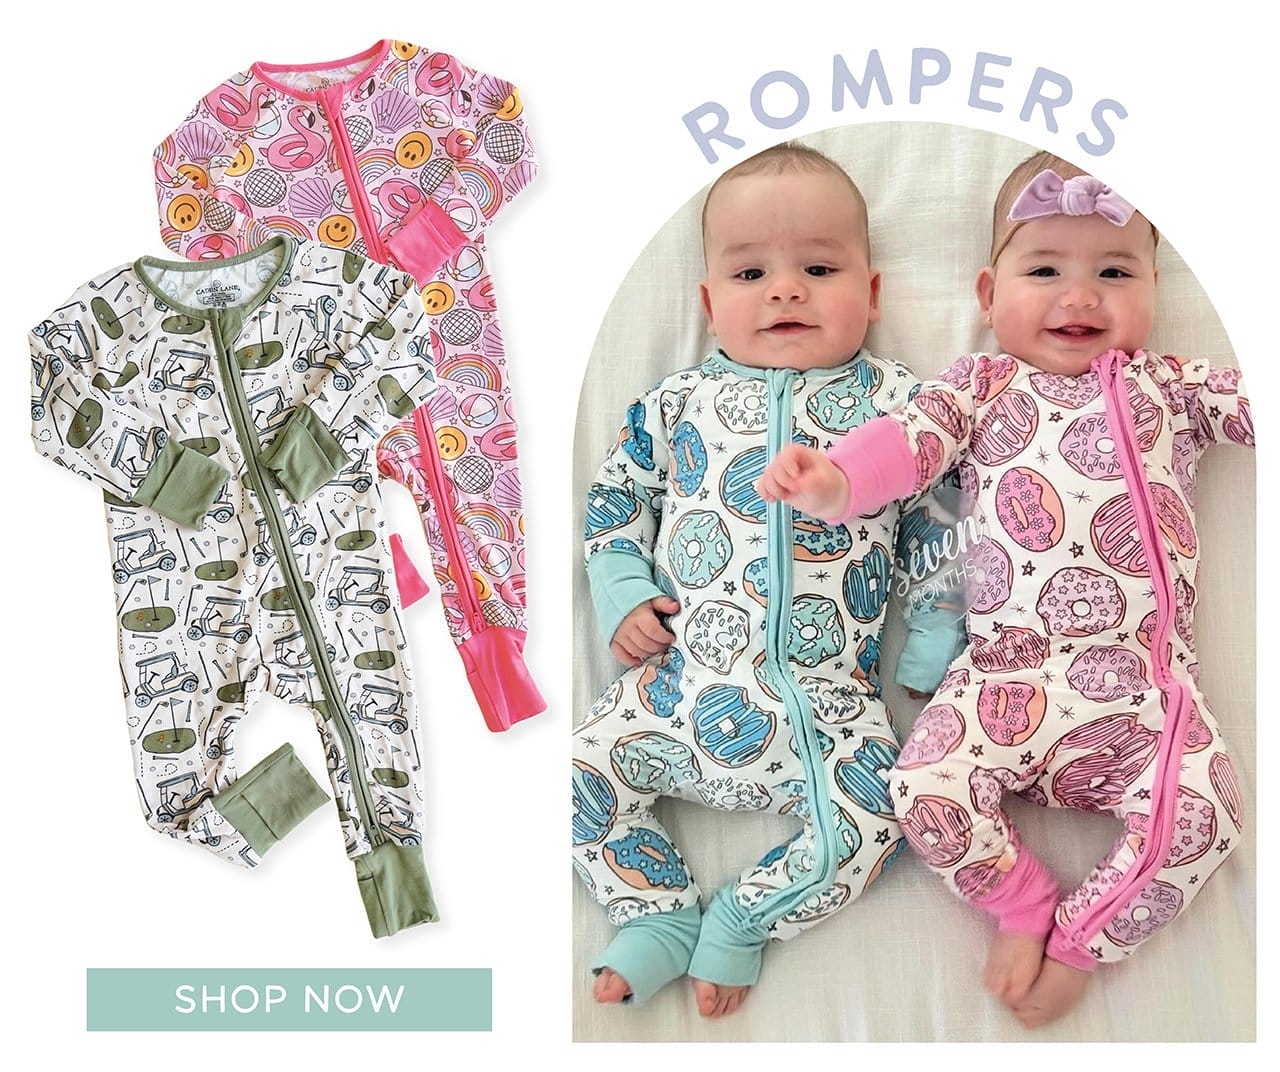 ROMPERS | SHOP NOW